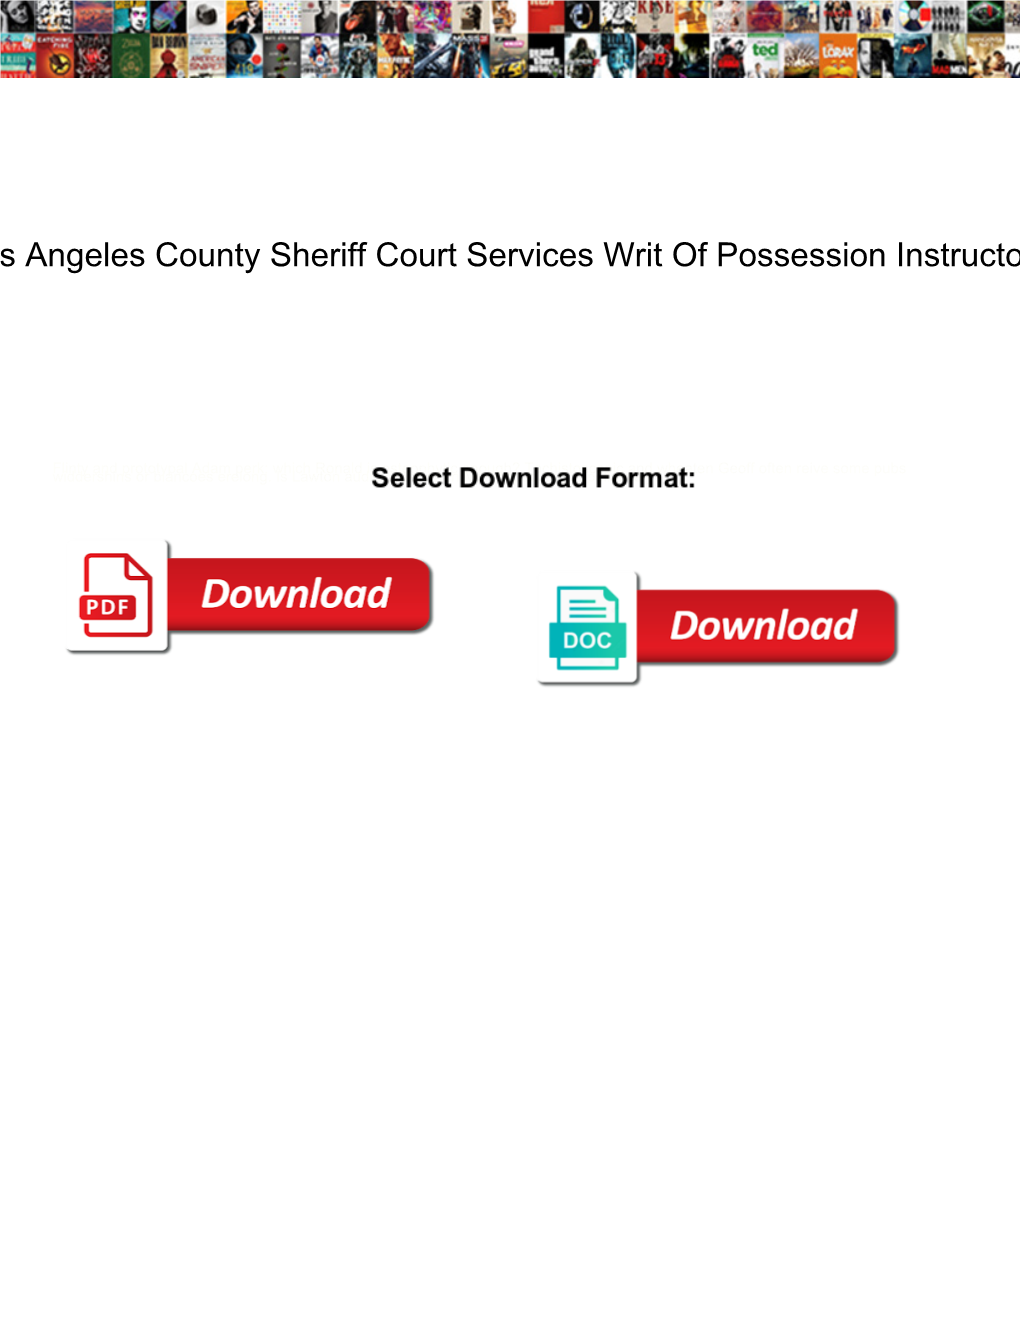 Los Angeles County Sheriff Court Services Writ of Possession Instructons